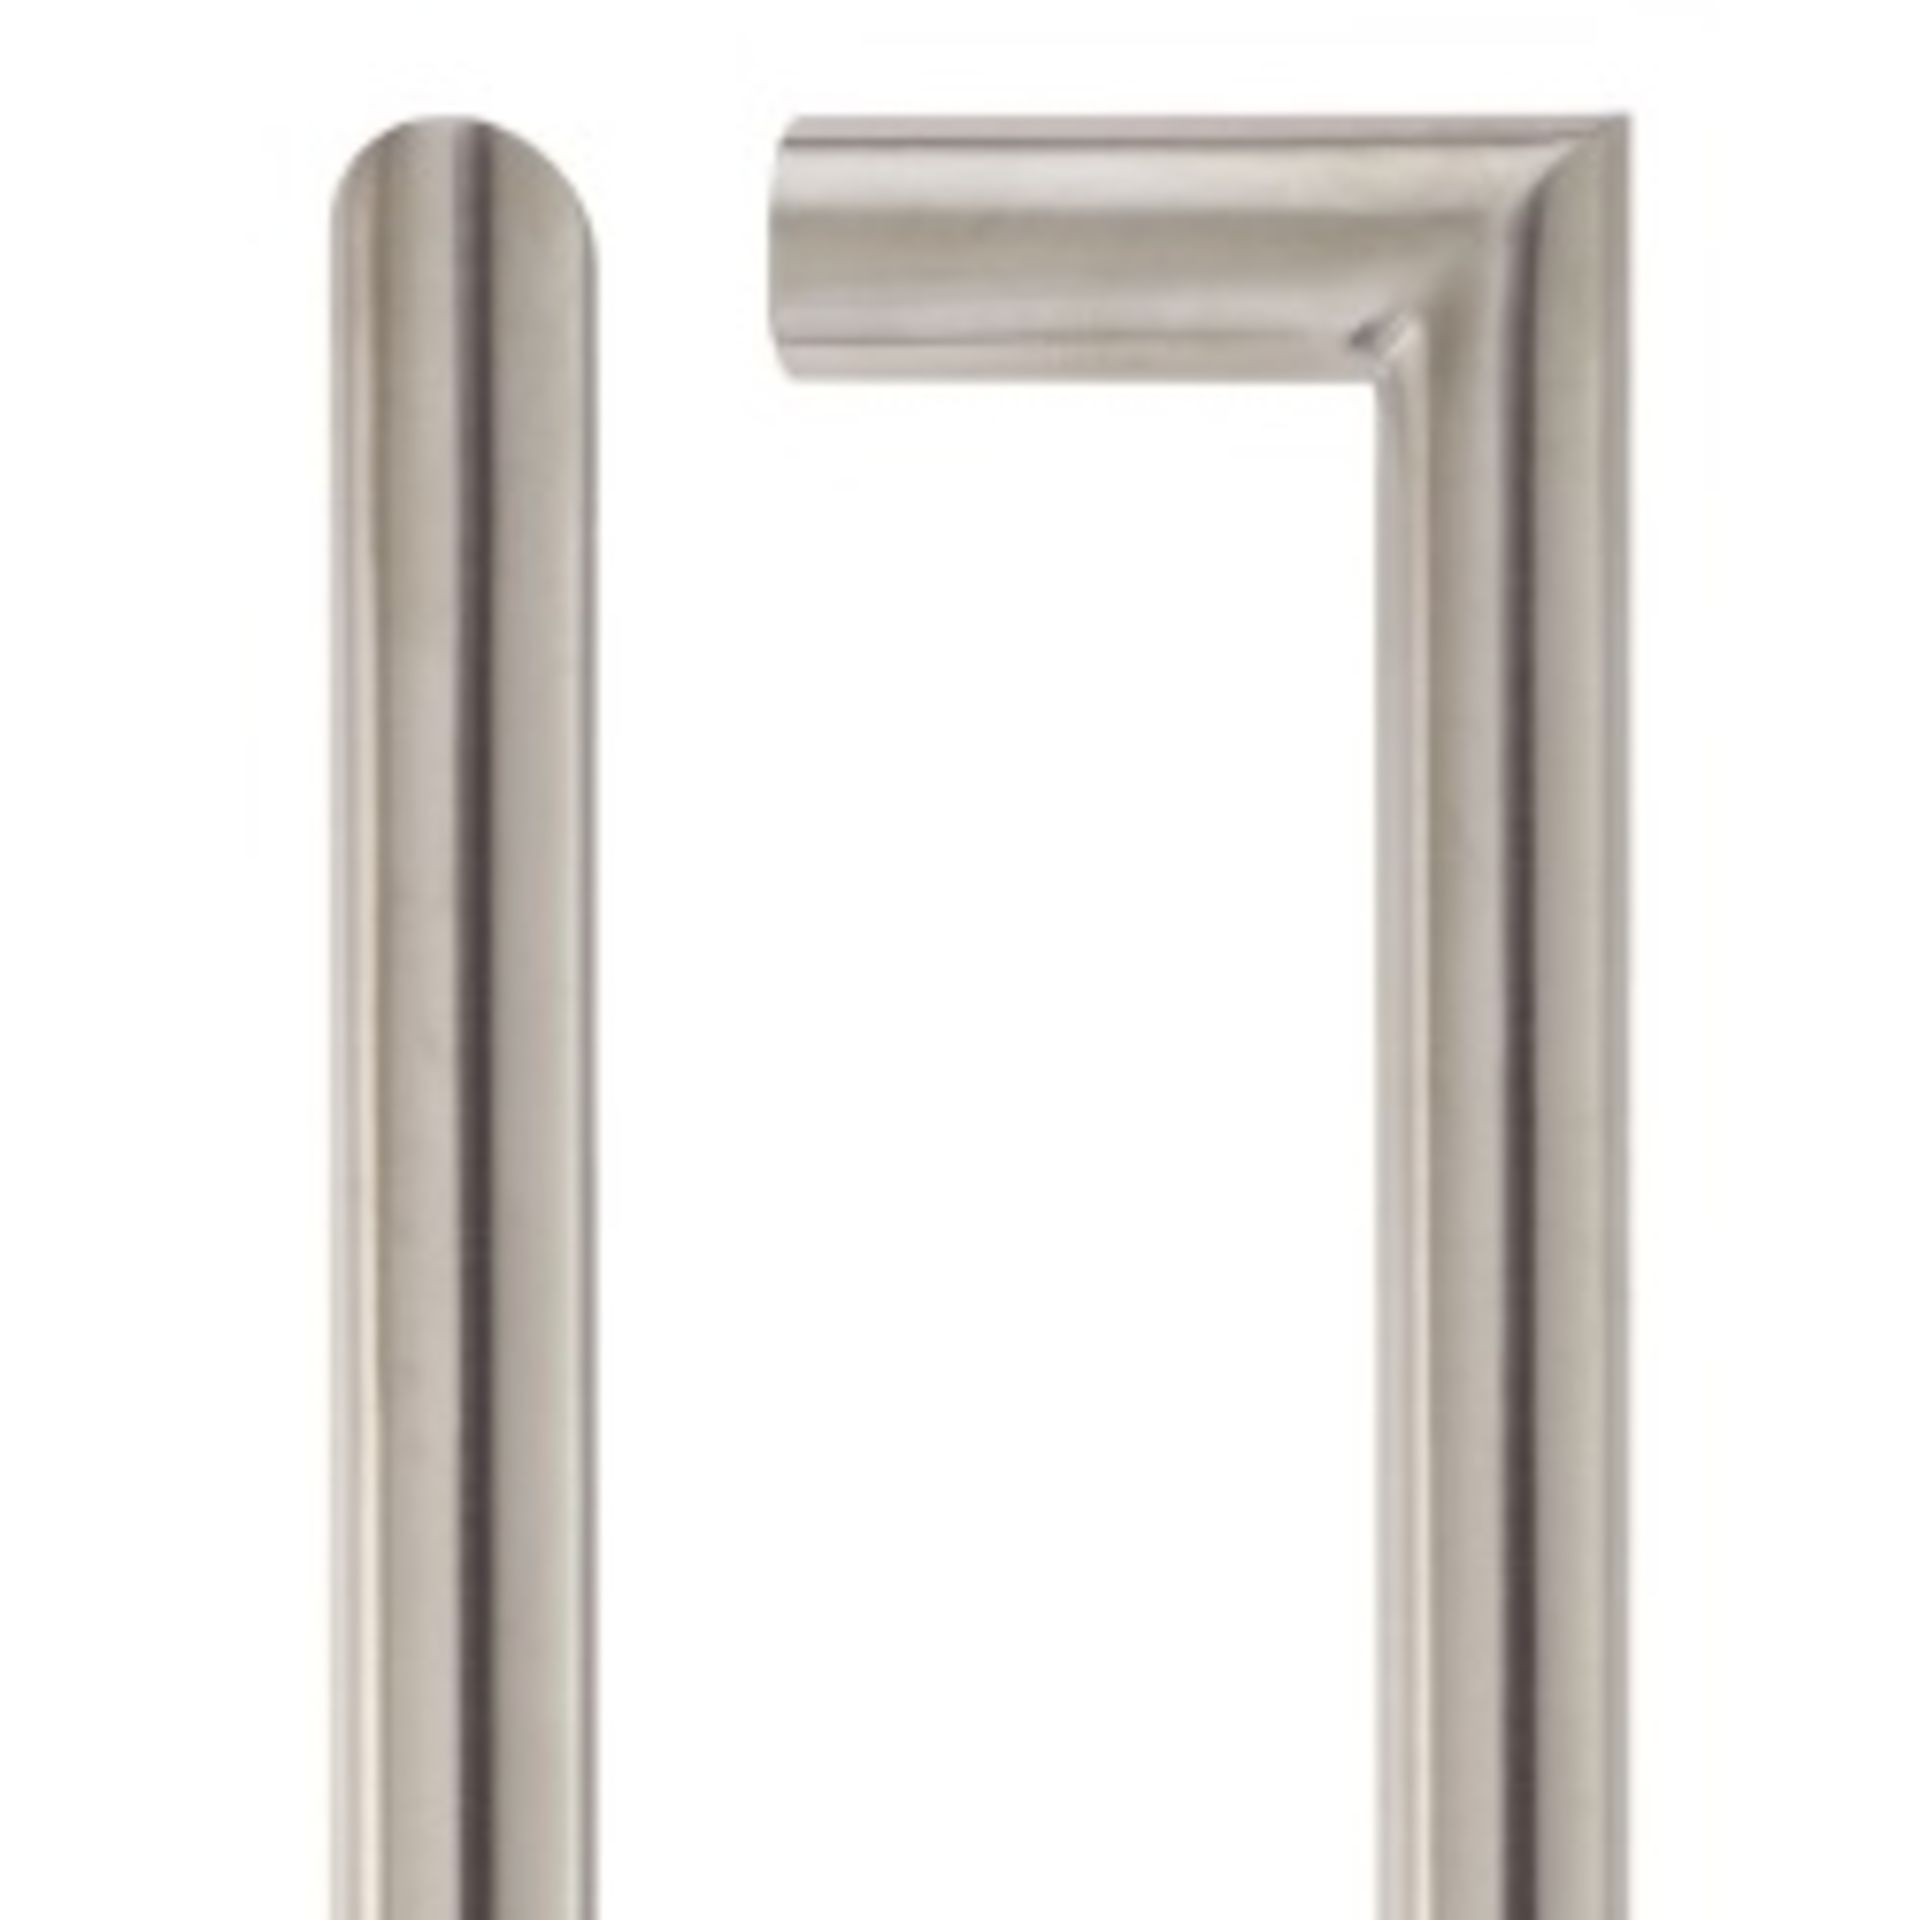 2 x Boxes Zoo Hardware Mitred Pull Handles | ZCS2M600BS | 5 pcs per box | Total RRP £80